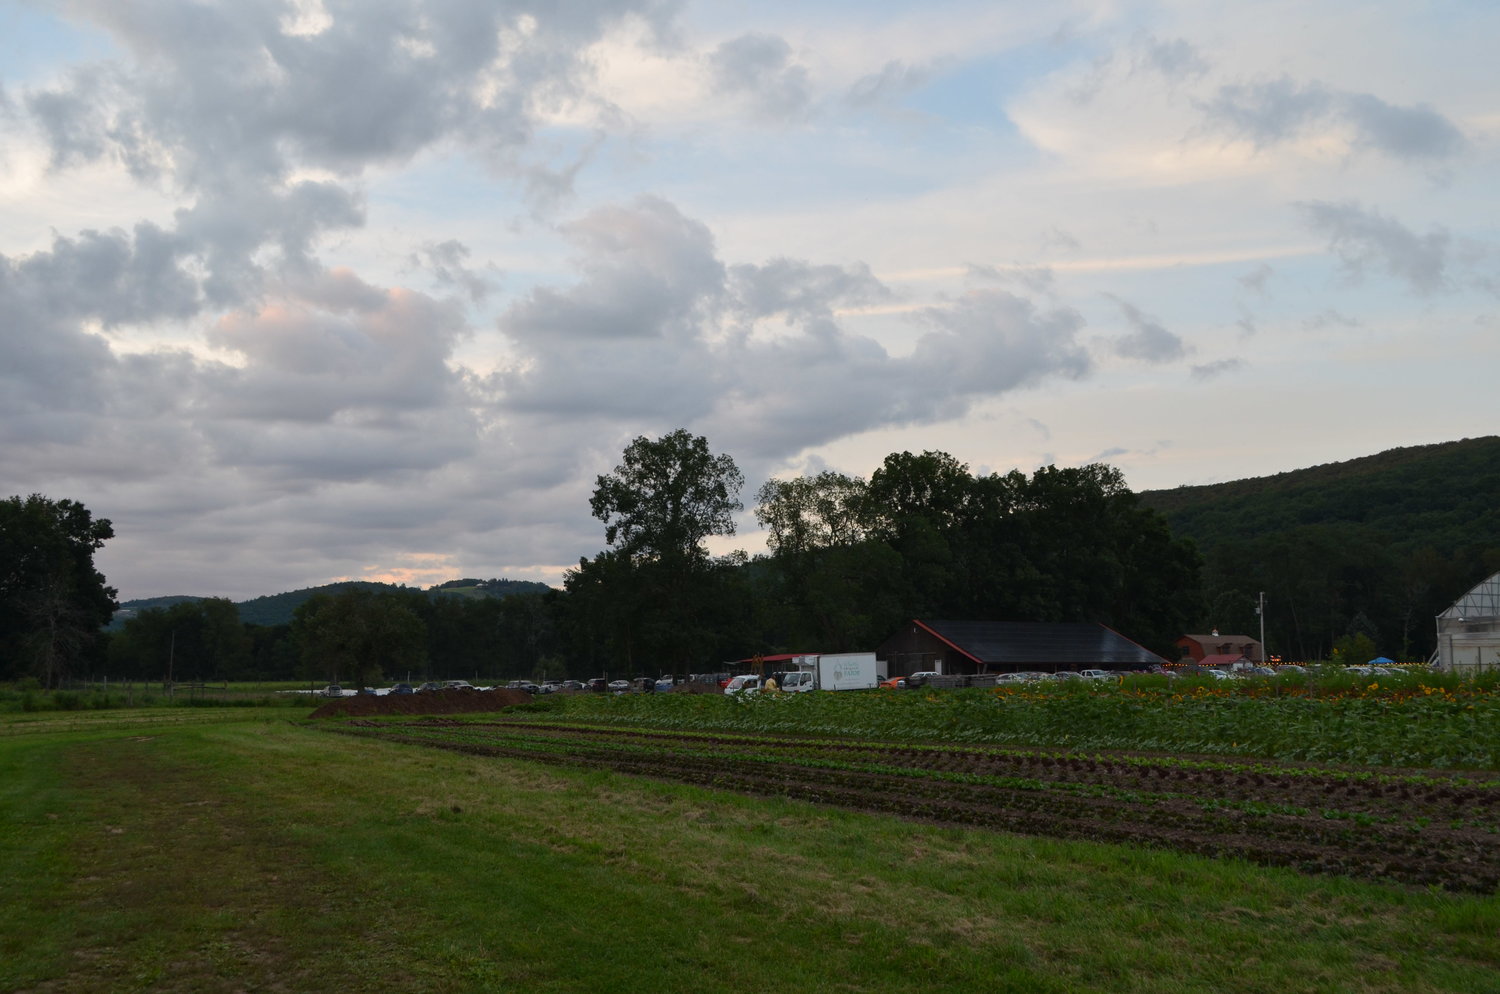 "Dream on the Farm" takes place on Willow Wisp Organic Farm, the headquarters of the Farm Arts Collective.